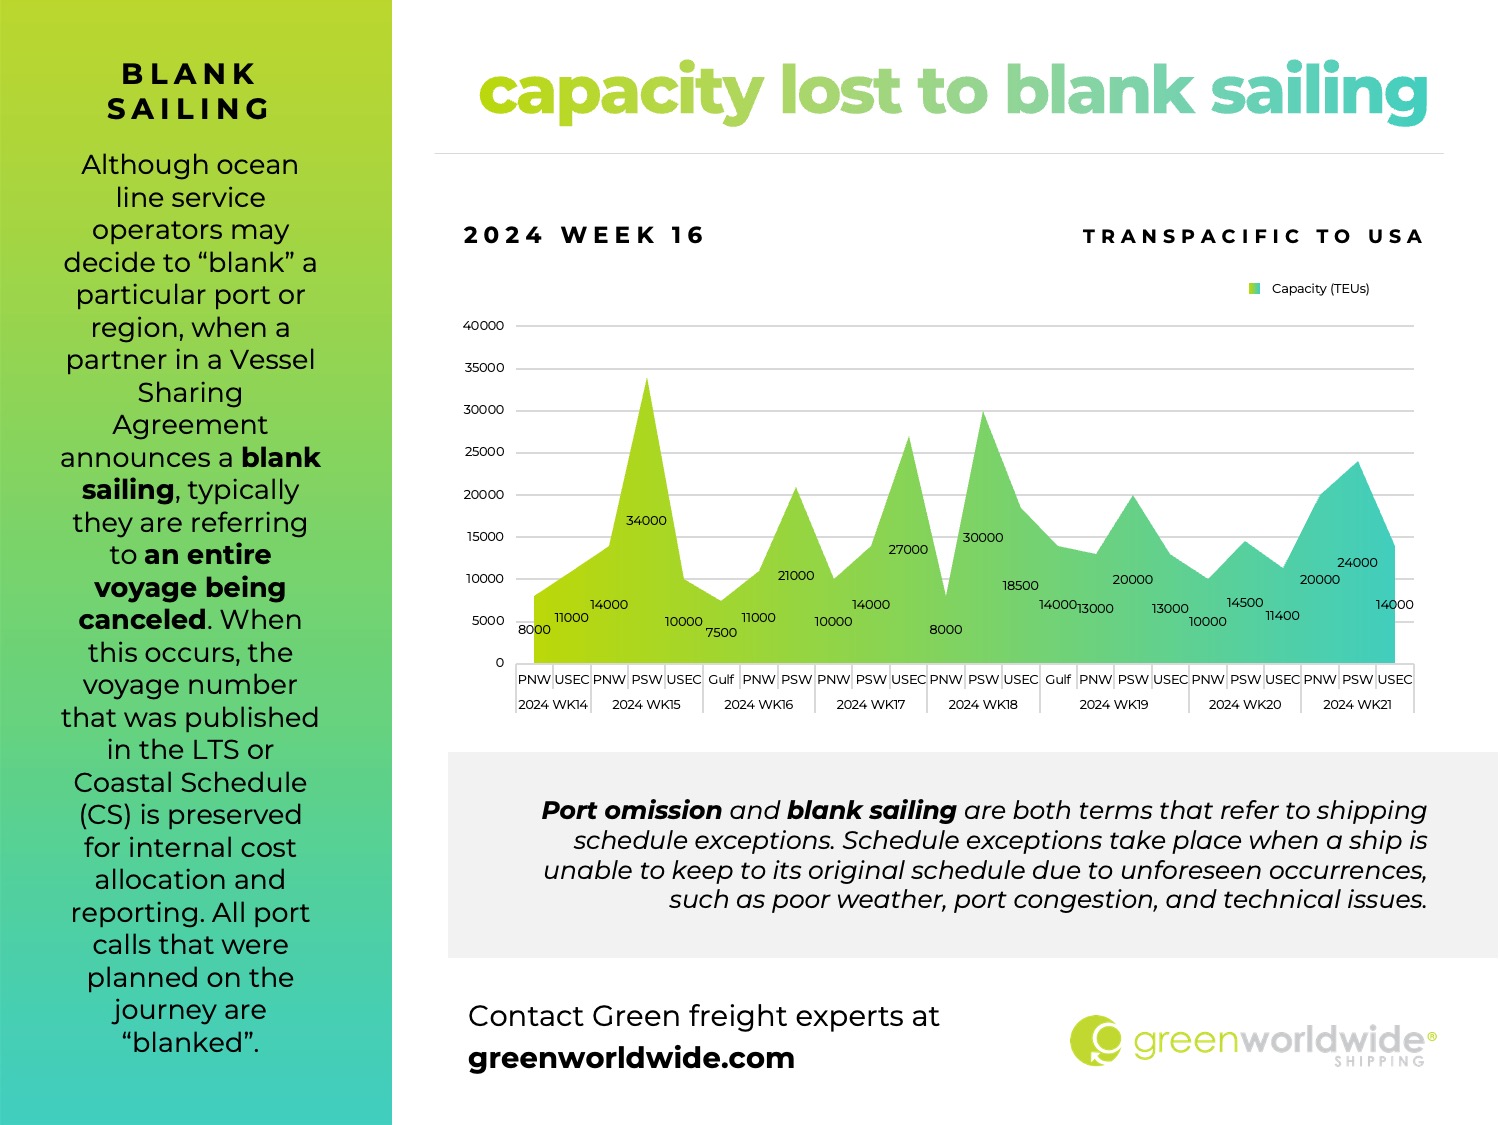 Freight Market Update Week 16 2024 Green Worldwide Shipping, blank sailing, port of baltimore, panama canal, labor unrest